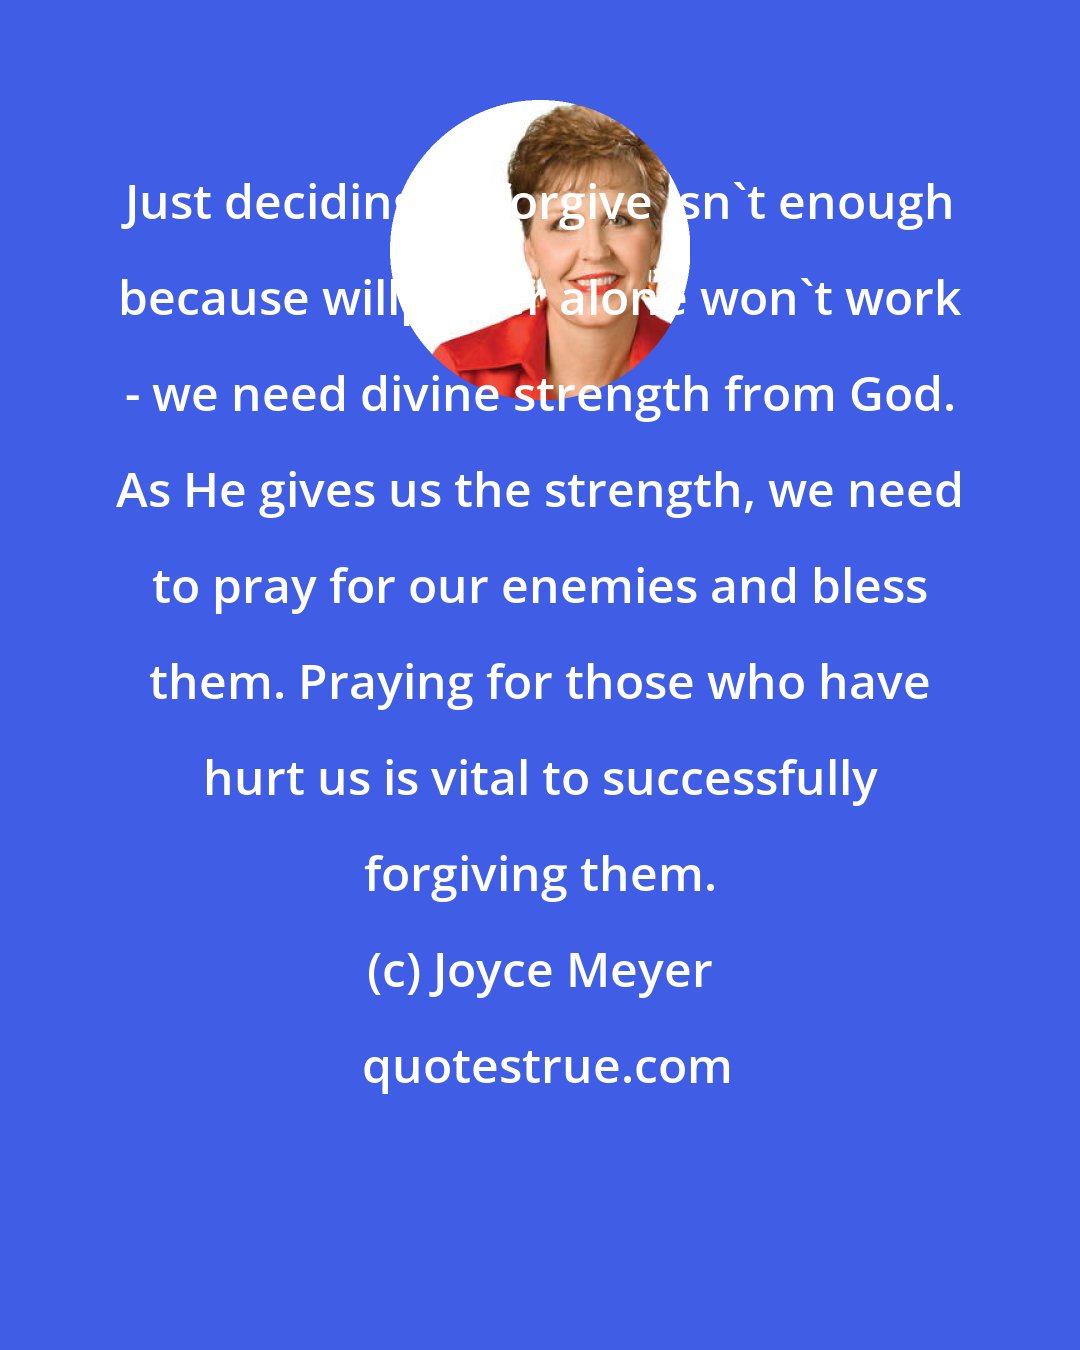 Joyce Meyer: Just deciding to forgive isn't enough because willpower alone won't work - we need divine strength from God. As He gives us the strength, we need to pray for our enemies and bless them. Praying for those who have hurt us is vital to successfully forgiving them.